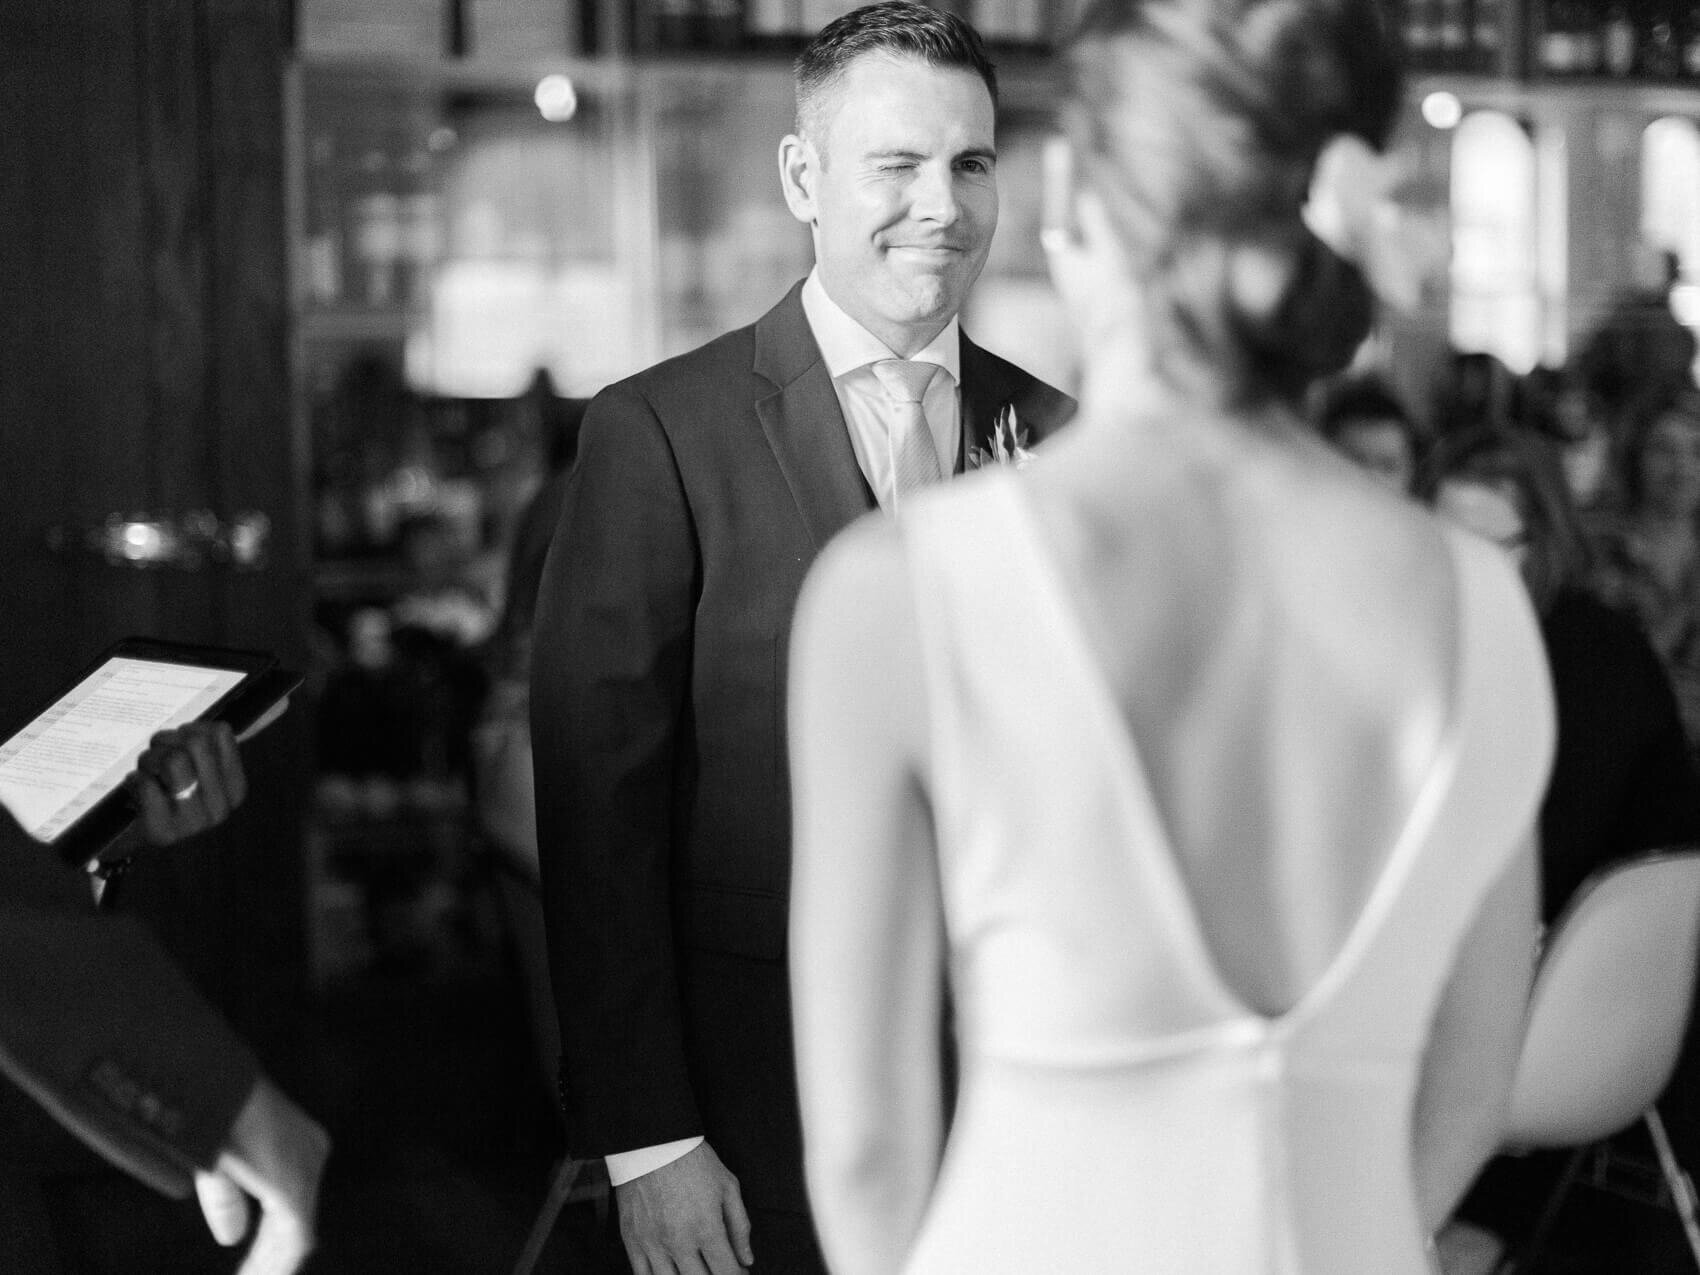 candid emotional wedding ceremony moment at an intimate downtown toronto wedding at terroni restaurant